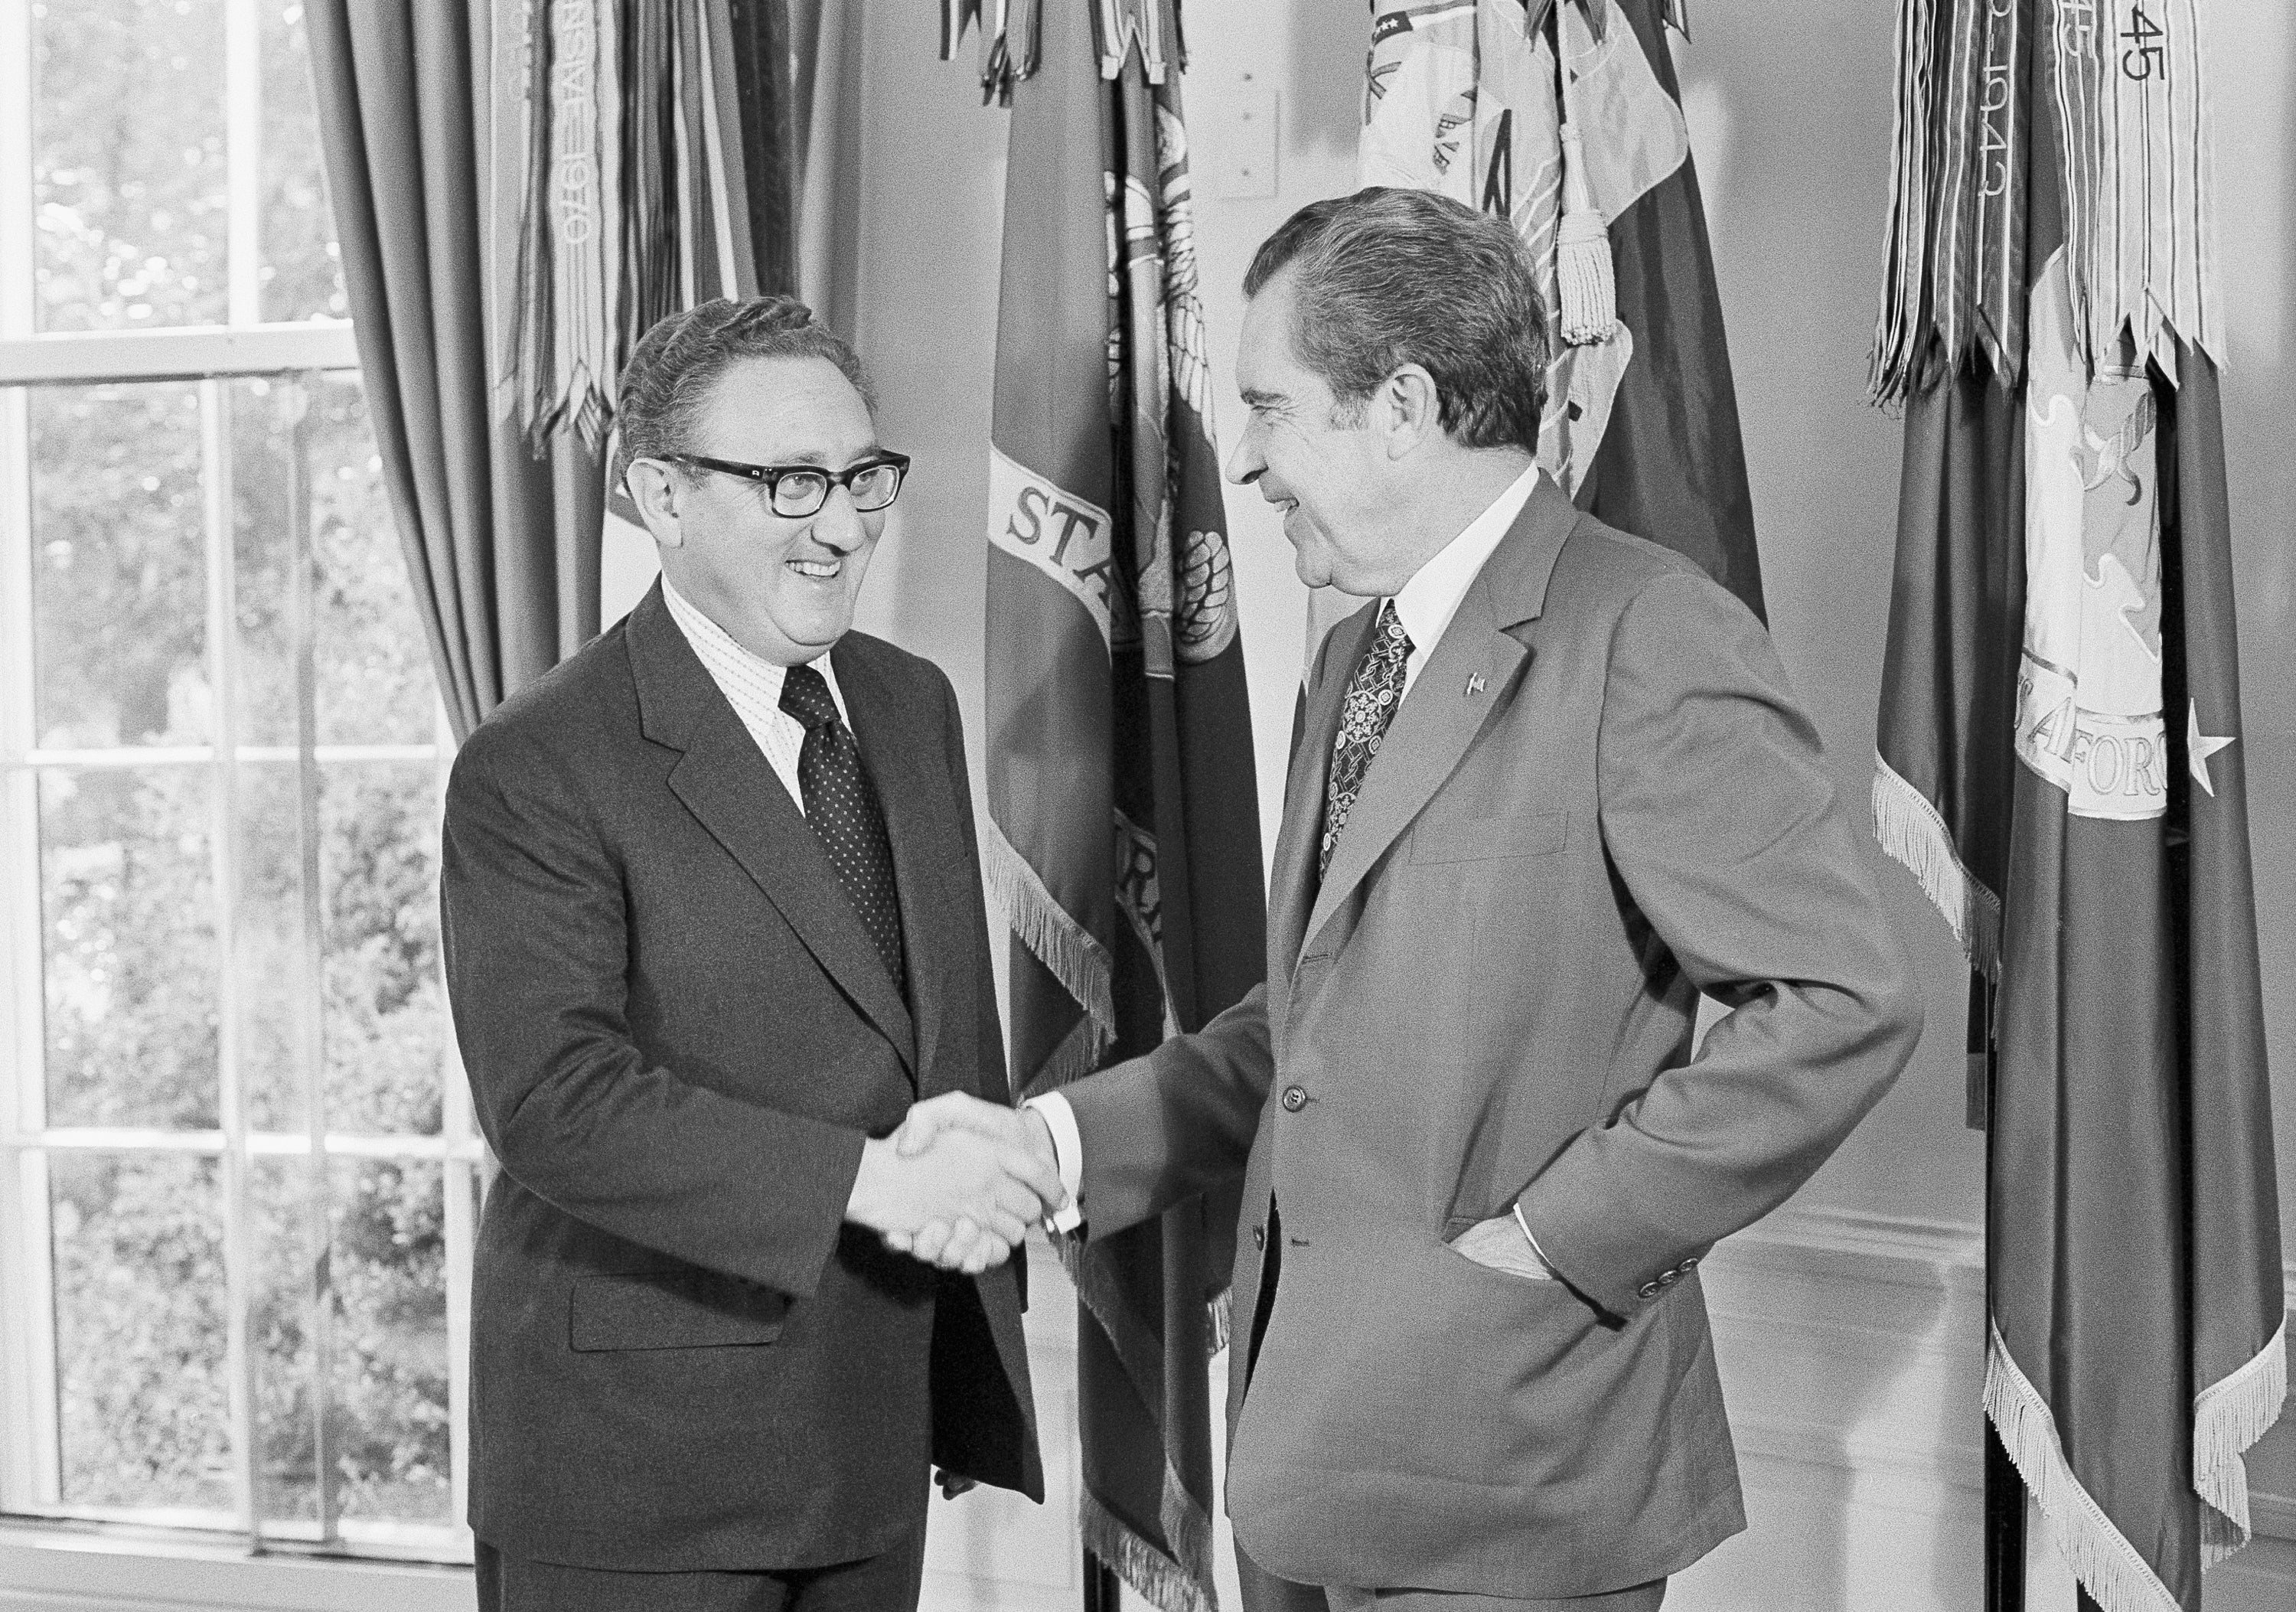 President Richard Nixon, right, offers his congratulations to his Secretary of State Henry Kissinger, after he was awarded the Nobel Peace Prize in 1973